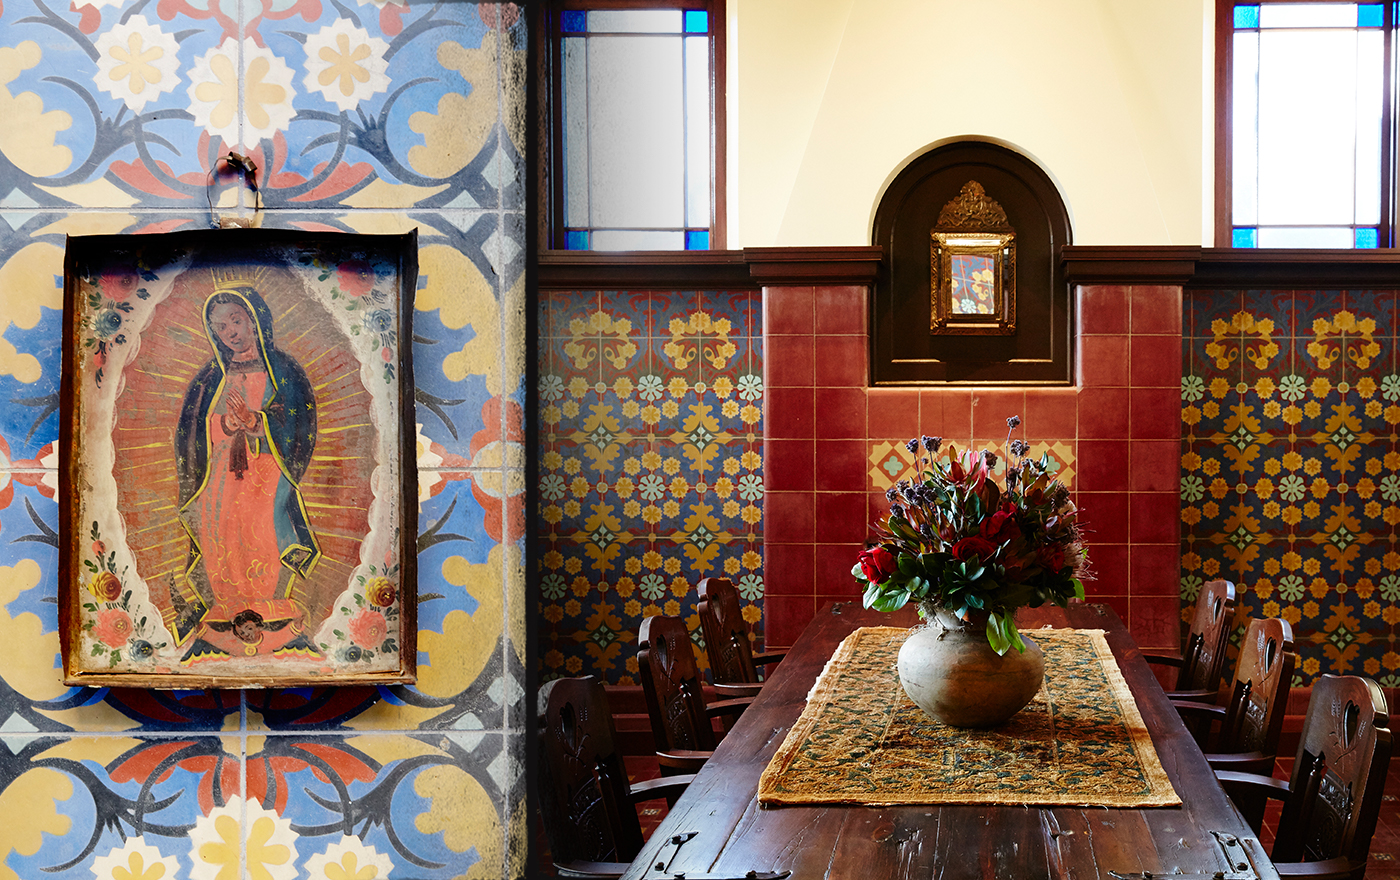 Picture of Brewmeister's office decorated with the Virgin de Guadalupe and colourful flowers.